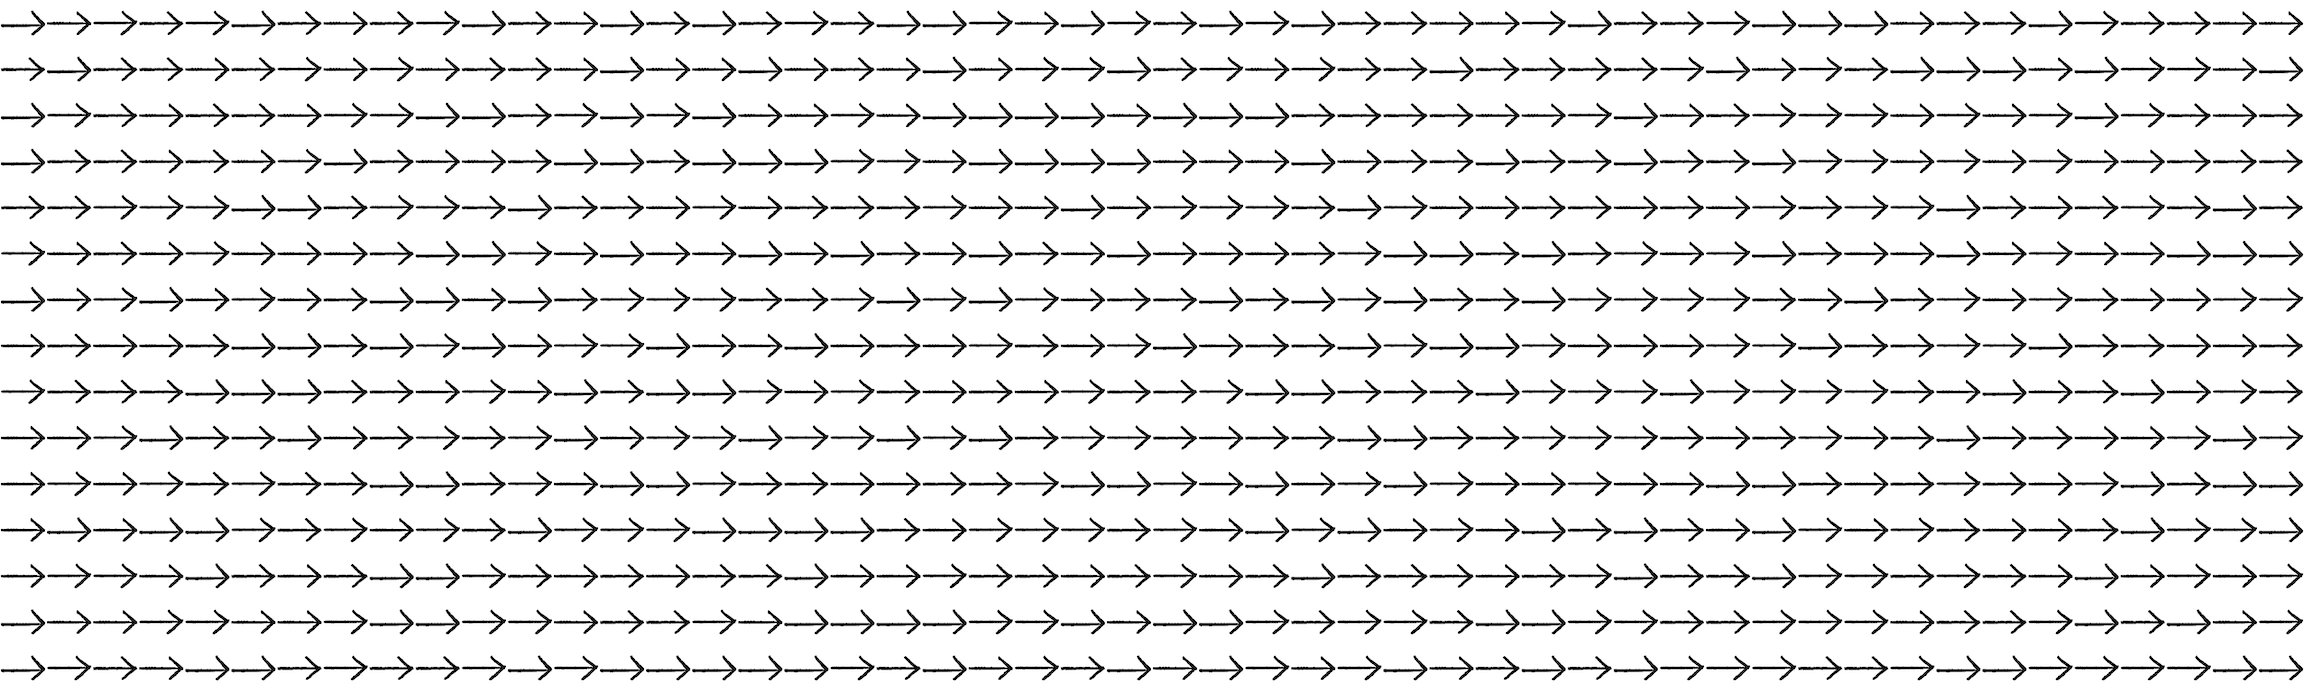 Figure 5.14: A flow field with all vectors pointing to the right